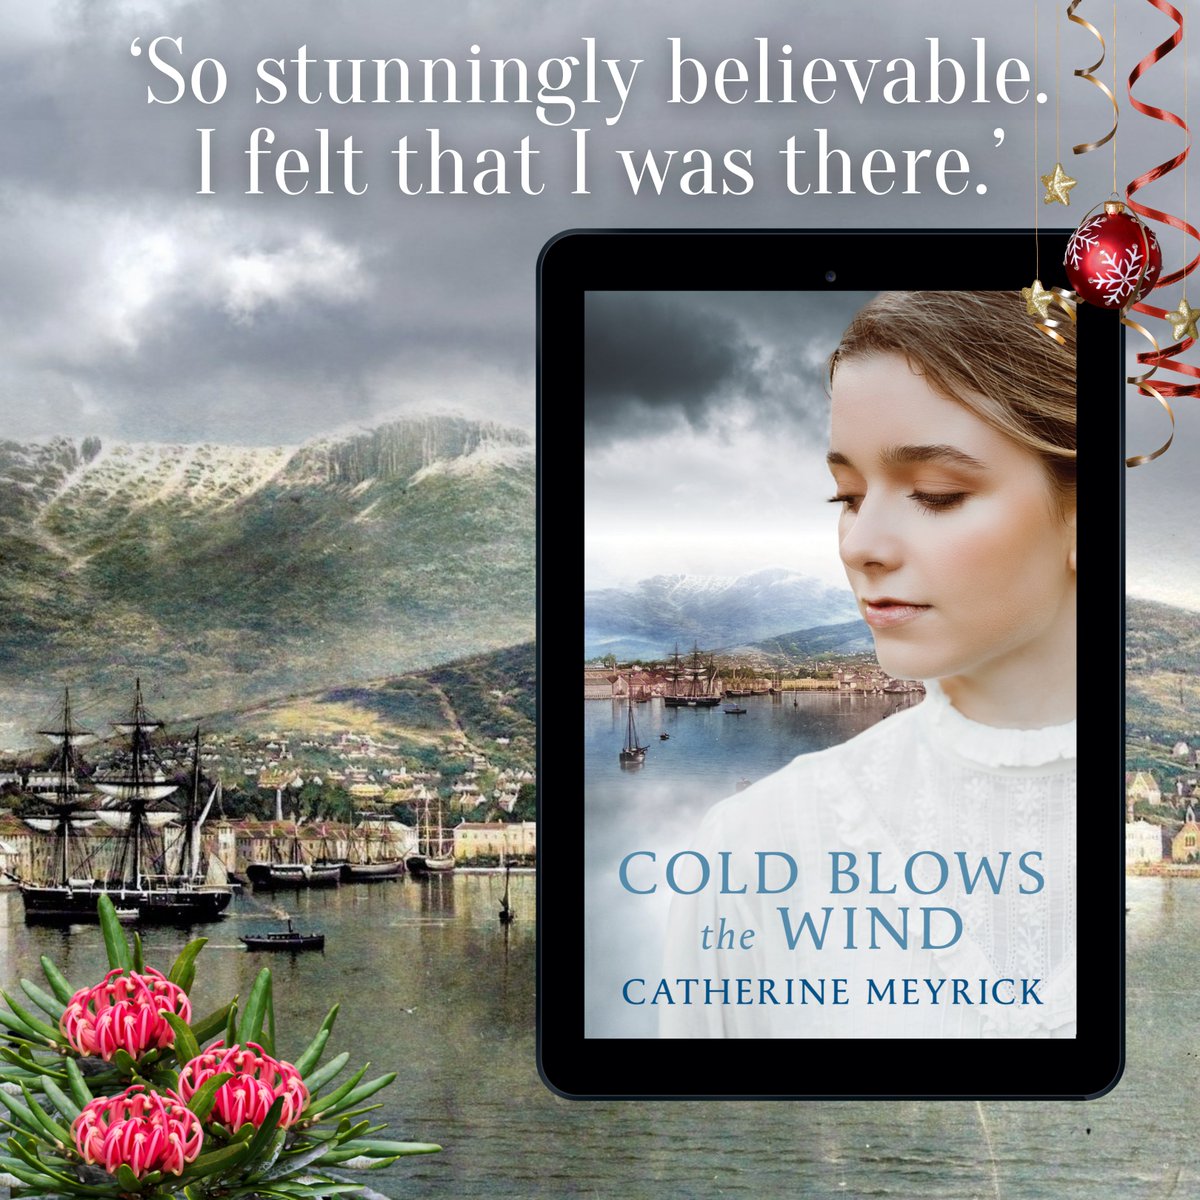 Step back in time to Hobart Town 1878. ‘Poignant, gritty and intensely moving.’ ‘A story that will stay with you long after you put the book down.’ books2read.com/ColdBlowstheWi… #HistoricalFiction #WomensFiction #Australia